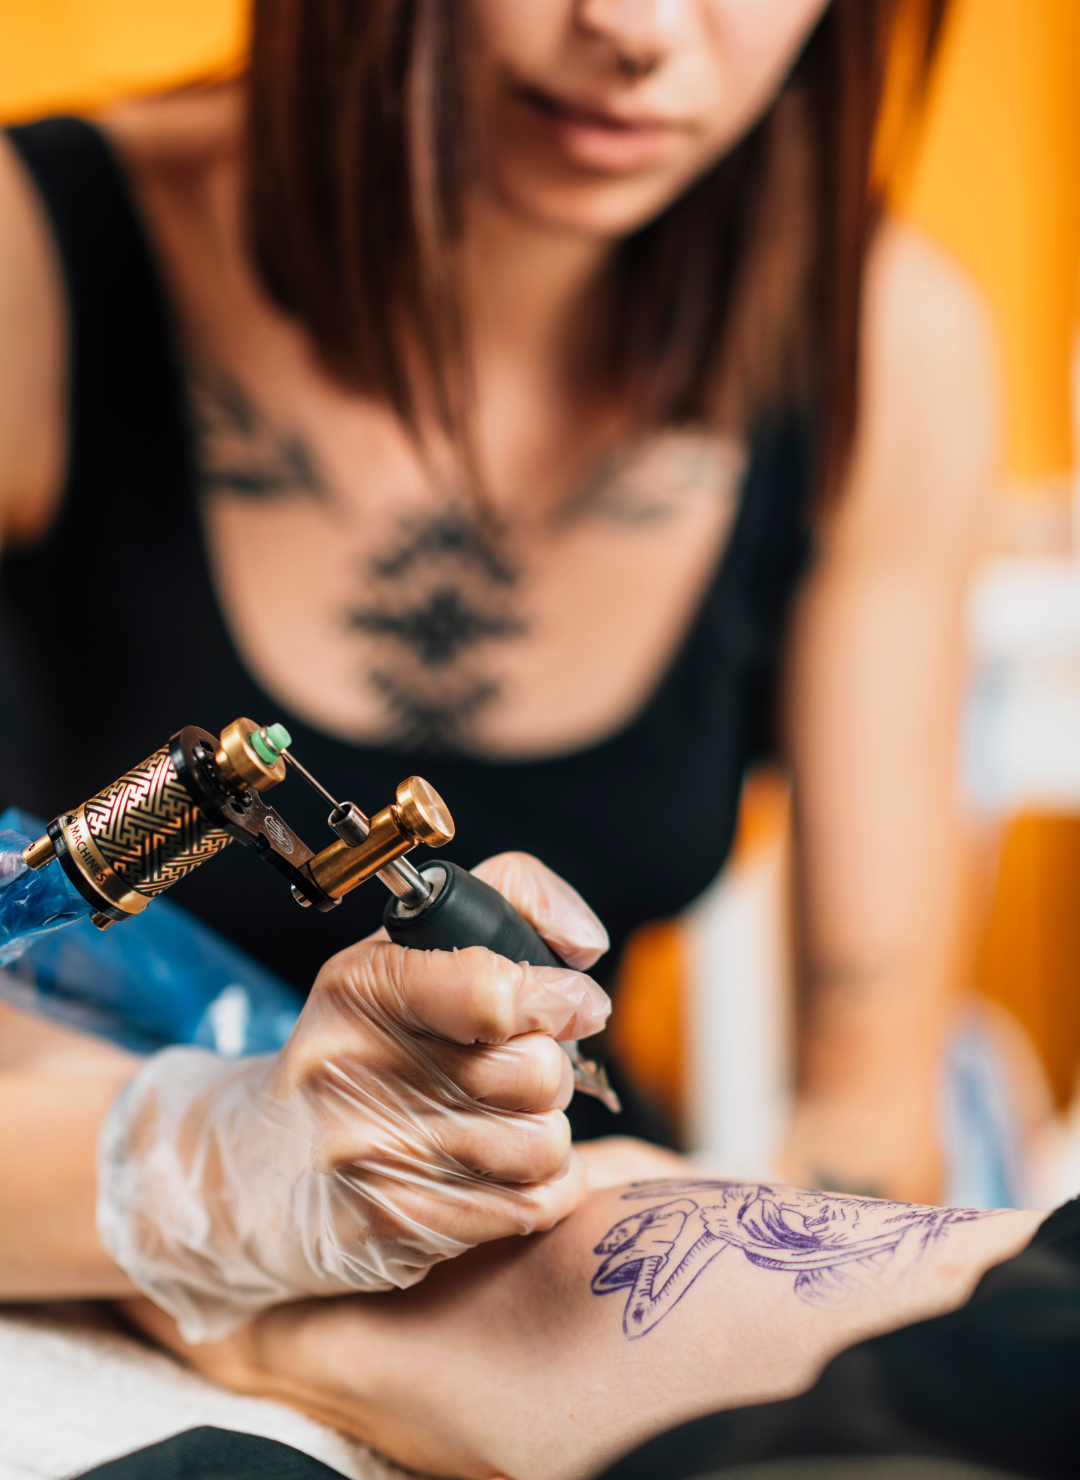 How Your Art Degree can lead to a Successful Career Change as a Tattoo Artist